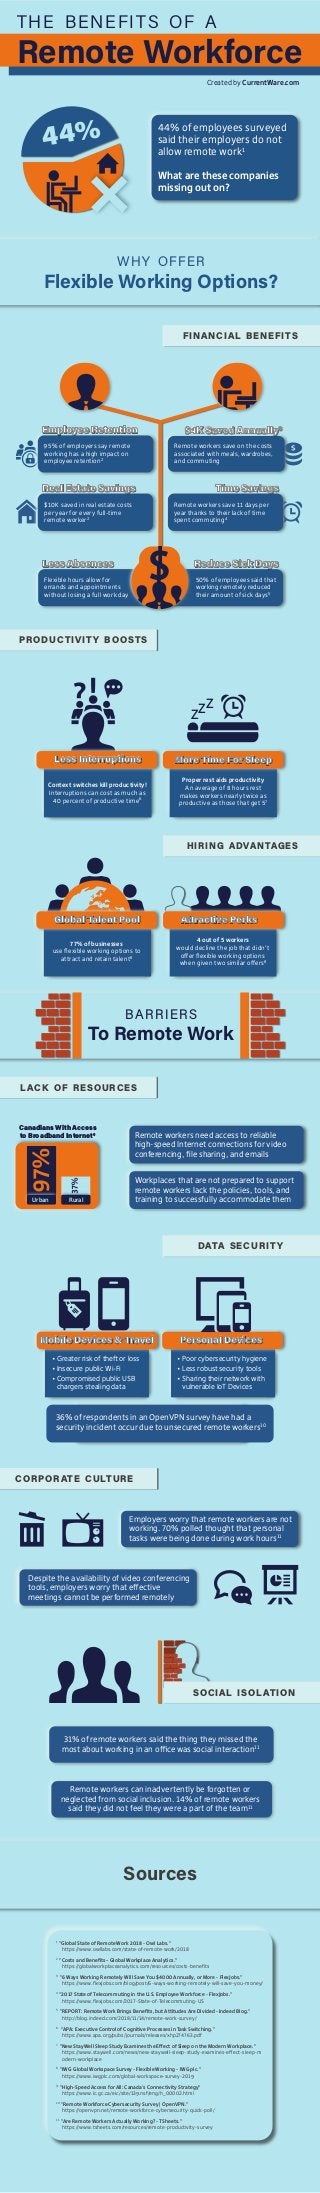 Sources
1
"Global State of Remote Work 2018 - Owl Labs."
https://www.owllabs.com/state-of-remote-work/2018
2
"Costs and Beneﬁts – Global Workplace Analytics."
https://globalworkplaceanalytics.com/resources/costs-beneﬁts
3
"6 Ways Working Remotely Will Save You $4000 Annually, or More - FlexJobs."
https://www.ﬂexjobs.com/blog/post/6-ways-working-remotely-will-save-you-money/
4
"2017 State of Telecommuting in the U.S. Employee Workforce - FlexJobs."
https://www.ﬂexjobs.com/2017-State-of-Telecommuting-US
5
"REPORT: Remote Work Brings Beneﬁts, but Attitudes Are Divided - Indeed Blog."
http://blog.indeed.com/2018/11/14/remote-work-survey/
6
"APA: Executive Control of Cognitive Processes in Task Switching."
https://www.apa.org/pubs/journals/releases/xhp274763.pdf
7
"New StayWell Sleep Study Examines the Effect of Sleep on the Modern Workplace."
https://www.staywell.com/news/new-staywell-sleep-study-examines-effect-sleep-m
odern-workplace
8
"IWG Global Workspace Survey - Flexible Working - IWG plc."
https://www.iwgplc.com/global-workspace-survey-2019
9
"High-Speed Access for All: Canada's Connectivity Strategy"
https://www.ic.gc.ca/eic/site/139.nsf/eng/h_00002.html
10
"Remote Workforce Cybersecurity Survey | OpenVPN."
https://openvpn.net/remote-workforce-cybersecurity-quick-poll/
11
"Are Remote Workers Actually Working? - TSheets."
https://www.tsheets.com/resources/remote-productivity-survey
LACK OF RESOURCES
BARRIERS
To Remote Work
Urban Rural
Workplaces that are not prepared to support
remote workers lack the policies, tools, and
training to successfully accommodate them
Remote workers need access to reliable
high-speed Internet connections for video
conferencing, ﬁle sharing, and emails
36% of respondents in an OpenVPN survey have had a
security incident occur due to unsecured remote workers10
Personal DevicesPersonal Devices
• Poor cybersecurity hygiene
• Less robust security tools
• Sharing their network with
vulnerable IoT Devices
Mobile Devices & TravelMobile Devices & Travel
• Greater risk of theft or loss
• Insecure public Wi-Fi
• Compromised public USB
chargers stealing data
CORPORATE CULTURE
Employers worry that remote workers are not
working. 70% polled thought that personal
tasks were being done during work hours11
Despite the availability of video conferencing
tools, employers worry that effective
meetings cannot be performed remotely
31% of remote workers said the thing they missed the
most about working in an office was social interaction11
Remote workers can inadvertently be forgotten or
neglected from social inclusion. 14% of remote workers
said they did not feel they were a part of the team11
SOCIAL ISOLATION
DATA SECURIT Y
Canadians With Access
to Broadband Internet9
Global Talent PoolGlobal Talent Pool
HIRING ADVANTAGES
77% of businesses
use ﬂexible working options to
attract and retain talent8
Attractive PerksAttractive Perks
4 out of 5 workers
would decline the job that didn’t
offer ﬂexible working options
when given two similar offers8
Less InterruptionsLess Interruptions
Context switches kill productivity!
Interruptions can cost as much as
40 percent of productive time6
ZZZ
More Time For SleepMore Time For Sleep
Proper rest aids productivity
An average of 8 hours rest
makes workers nearly twice as
productive as those that get 57
PRODUCTIVIT Y BOOSTS
95% of employers say remote
working has a high impact on
employee retention2
Employee RetentionEmployee Retention
$10K saved in real estate costs
per year for every full-time
remote worker2
Real Estate SavingsReal Estate Savings
Flexible hours allow for
errands and appointments
without losing a full work day
Less AbsencesLess Absences
Remote workers save on the costs
associated with meals, wardrobes,
and commuting
$4K Saved Annually3$4K Saved Annually3
Time SavingsTime Savings
50% of employees said that
working remotely reduced
their amount of sick days5
Reduce Sick DaysReduce Sick Days
FINANCIAL BENEFITS
Remote workers save 11 days per
year thanks to their lack of time
spent commuting4
$
THE BENEFITS OF A
Remote Workforce
WHY OFFER
Flexible Working Options?
Created by CurrentWare.com
44% 44% of employees surveyed
said their employers do not
allow remote work1
What are these companies
missing out on?
 